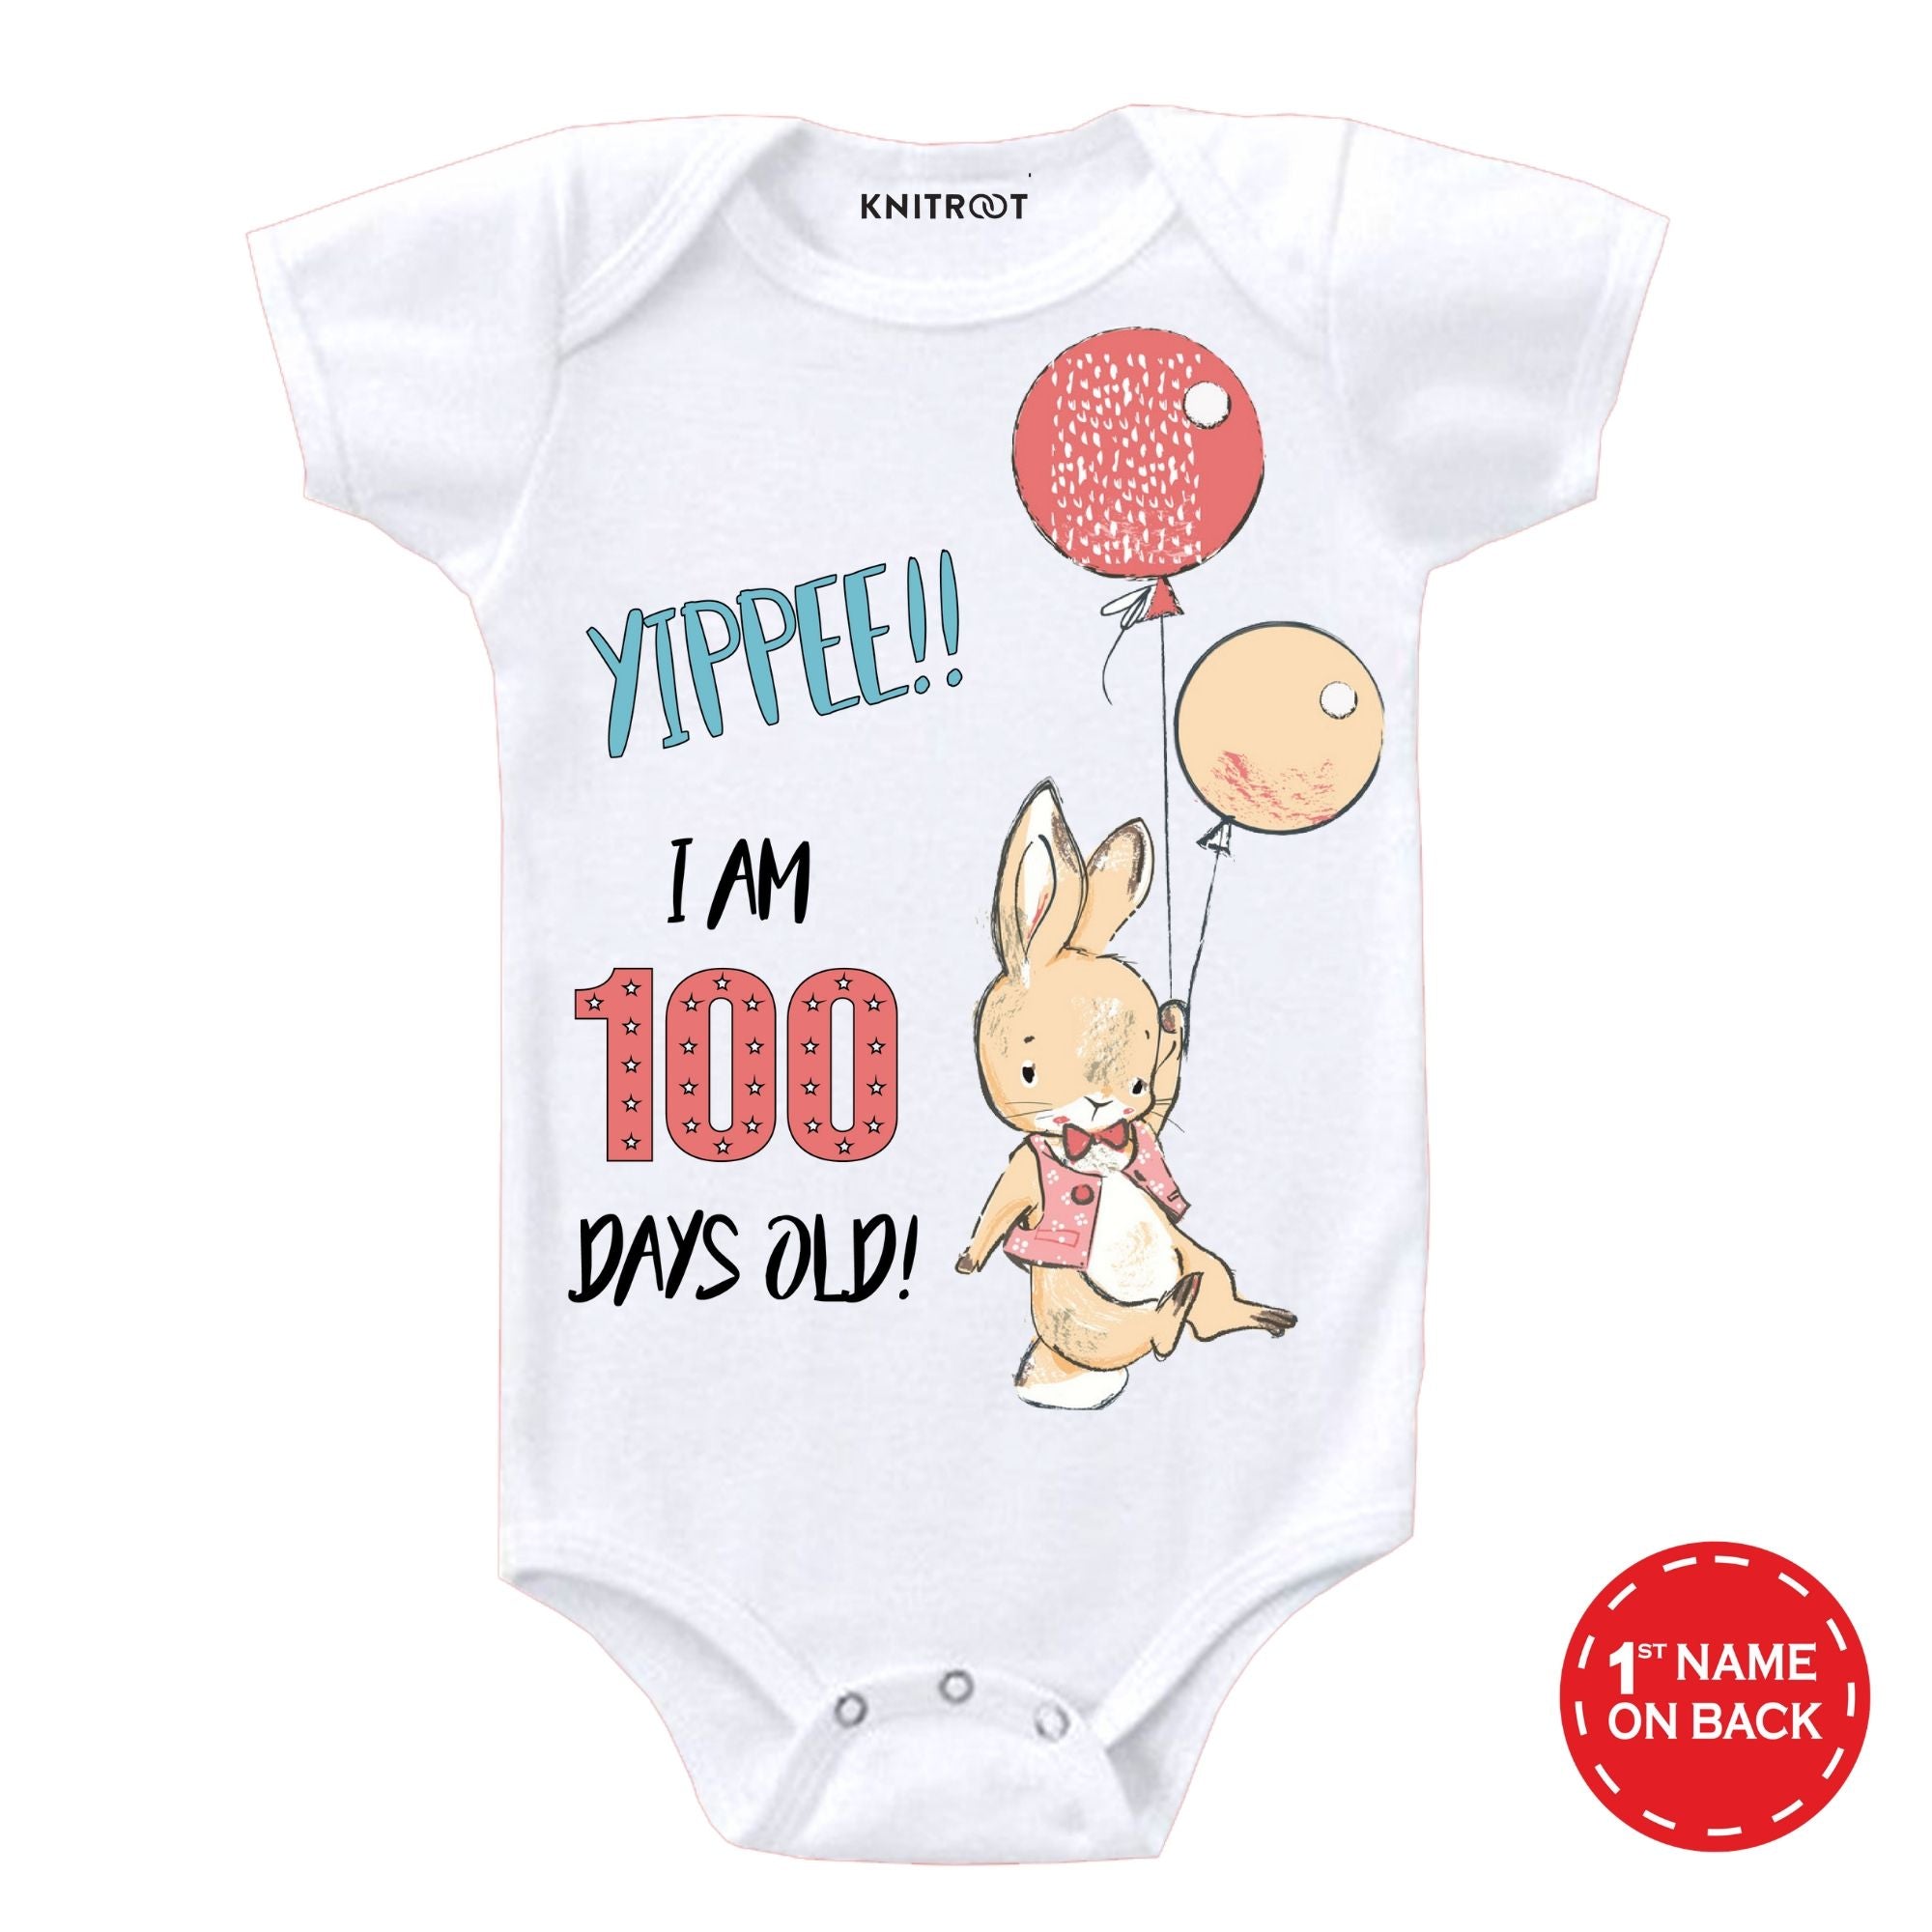 Yippe! I Am 100 Days Old  Onesie